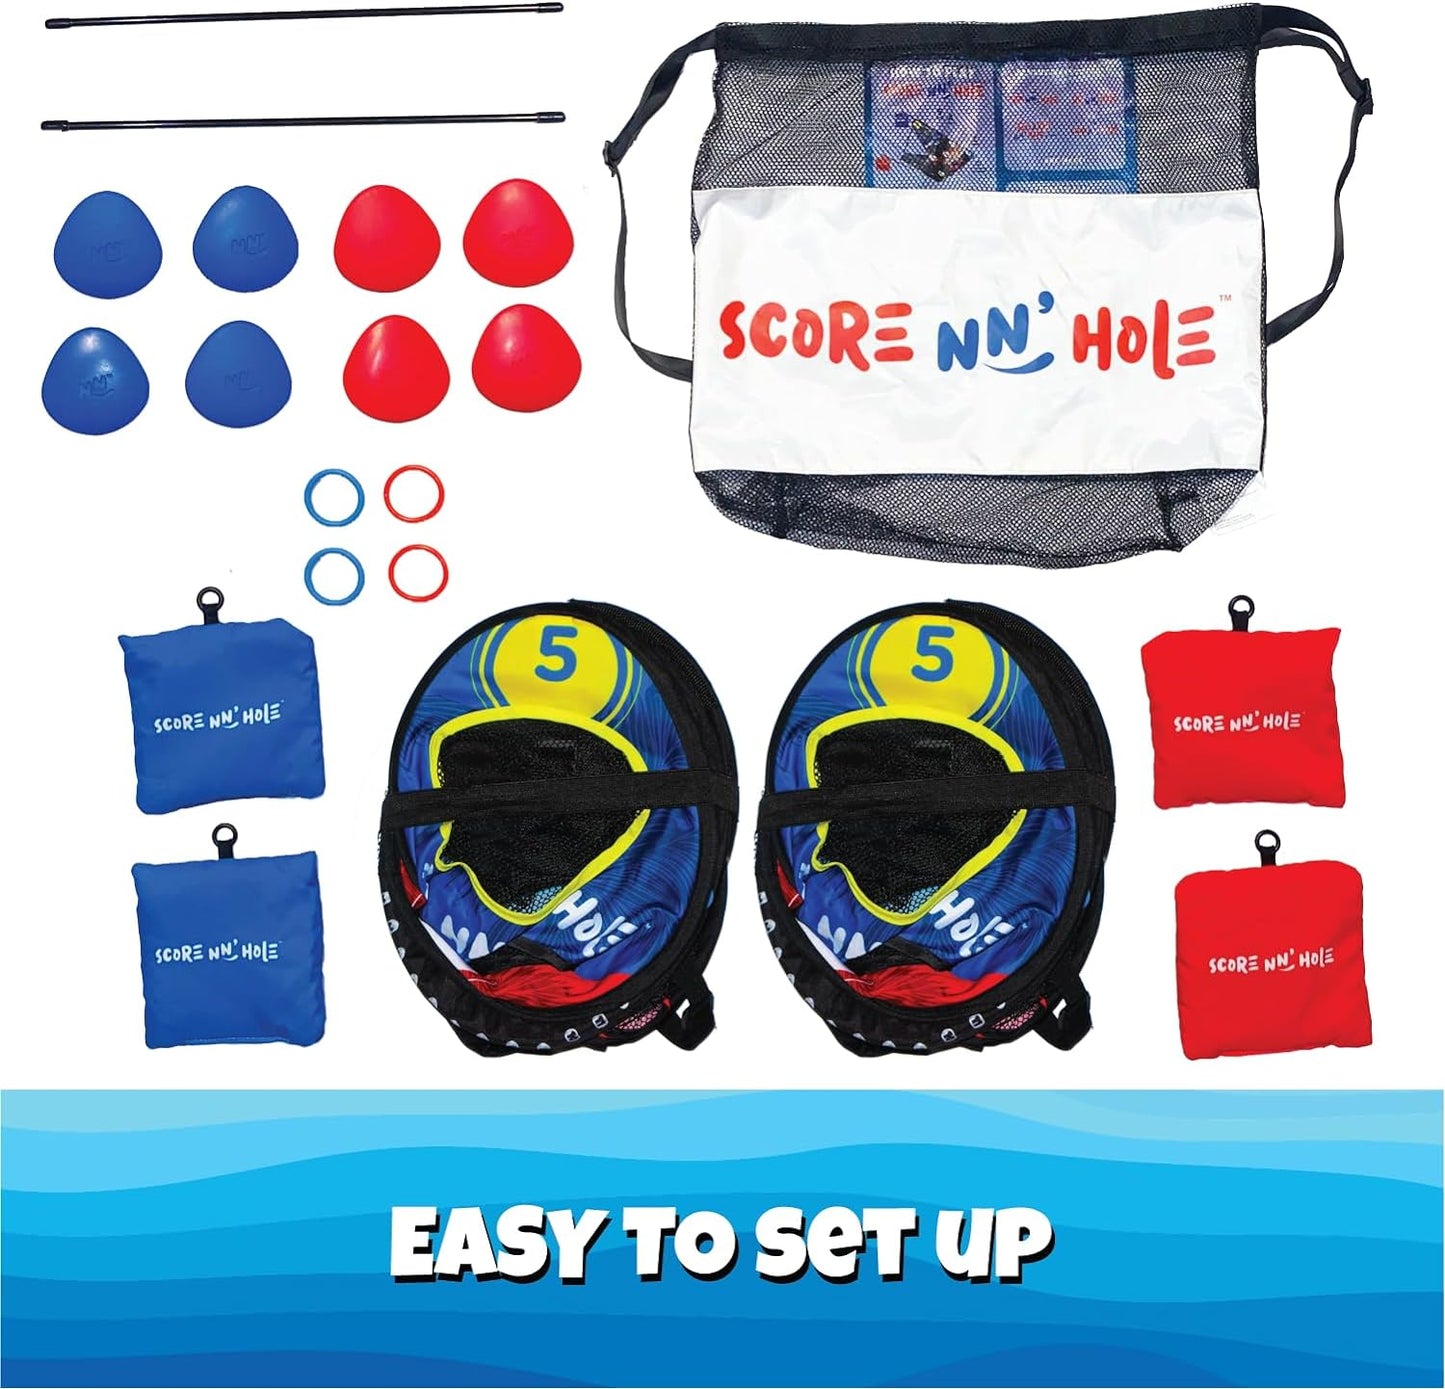 Fun Pool Game for All Ages | Well Made, Floats, Easy Setup | Stonne Skipping Meets Pool Cornhole | Pool Games for Adults and Family | Pool Toys |